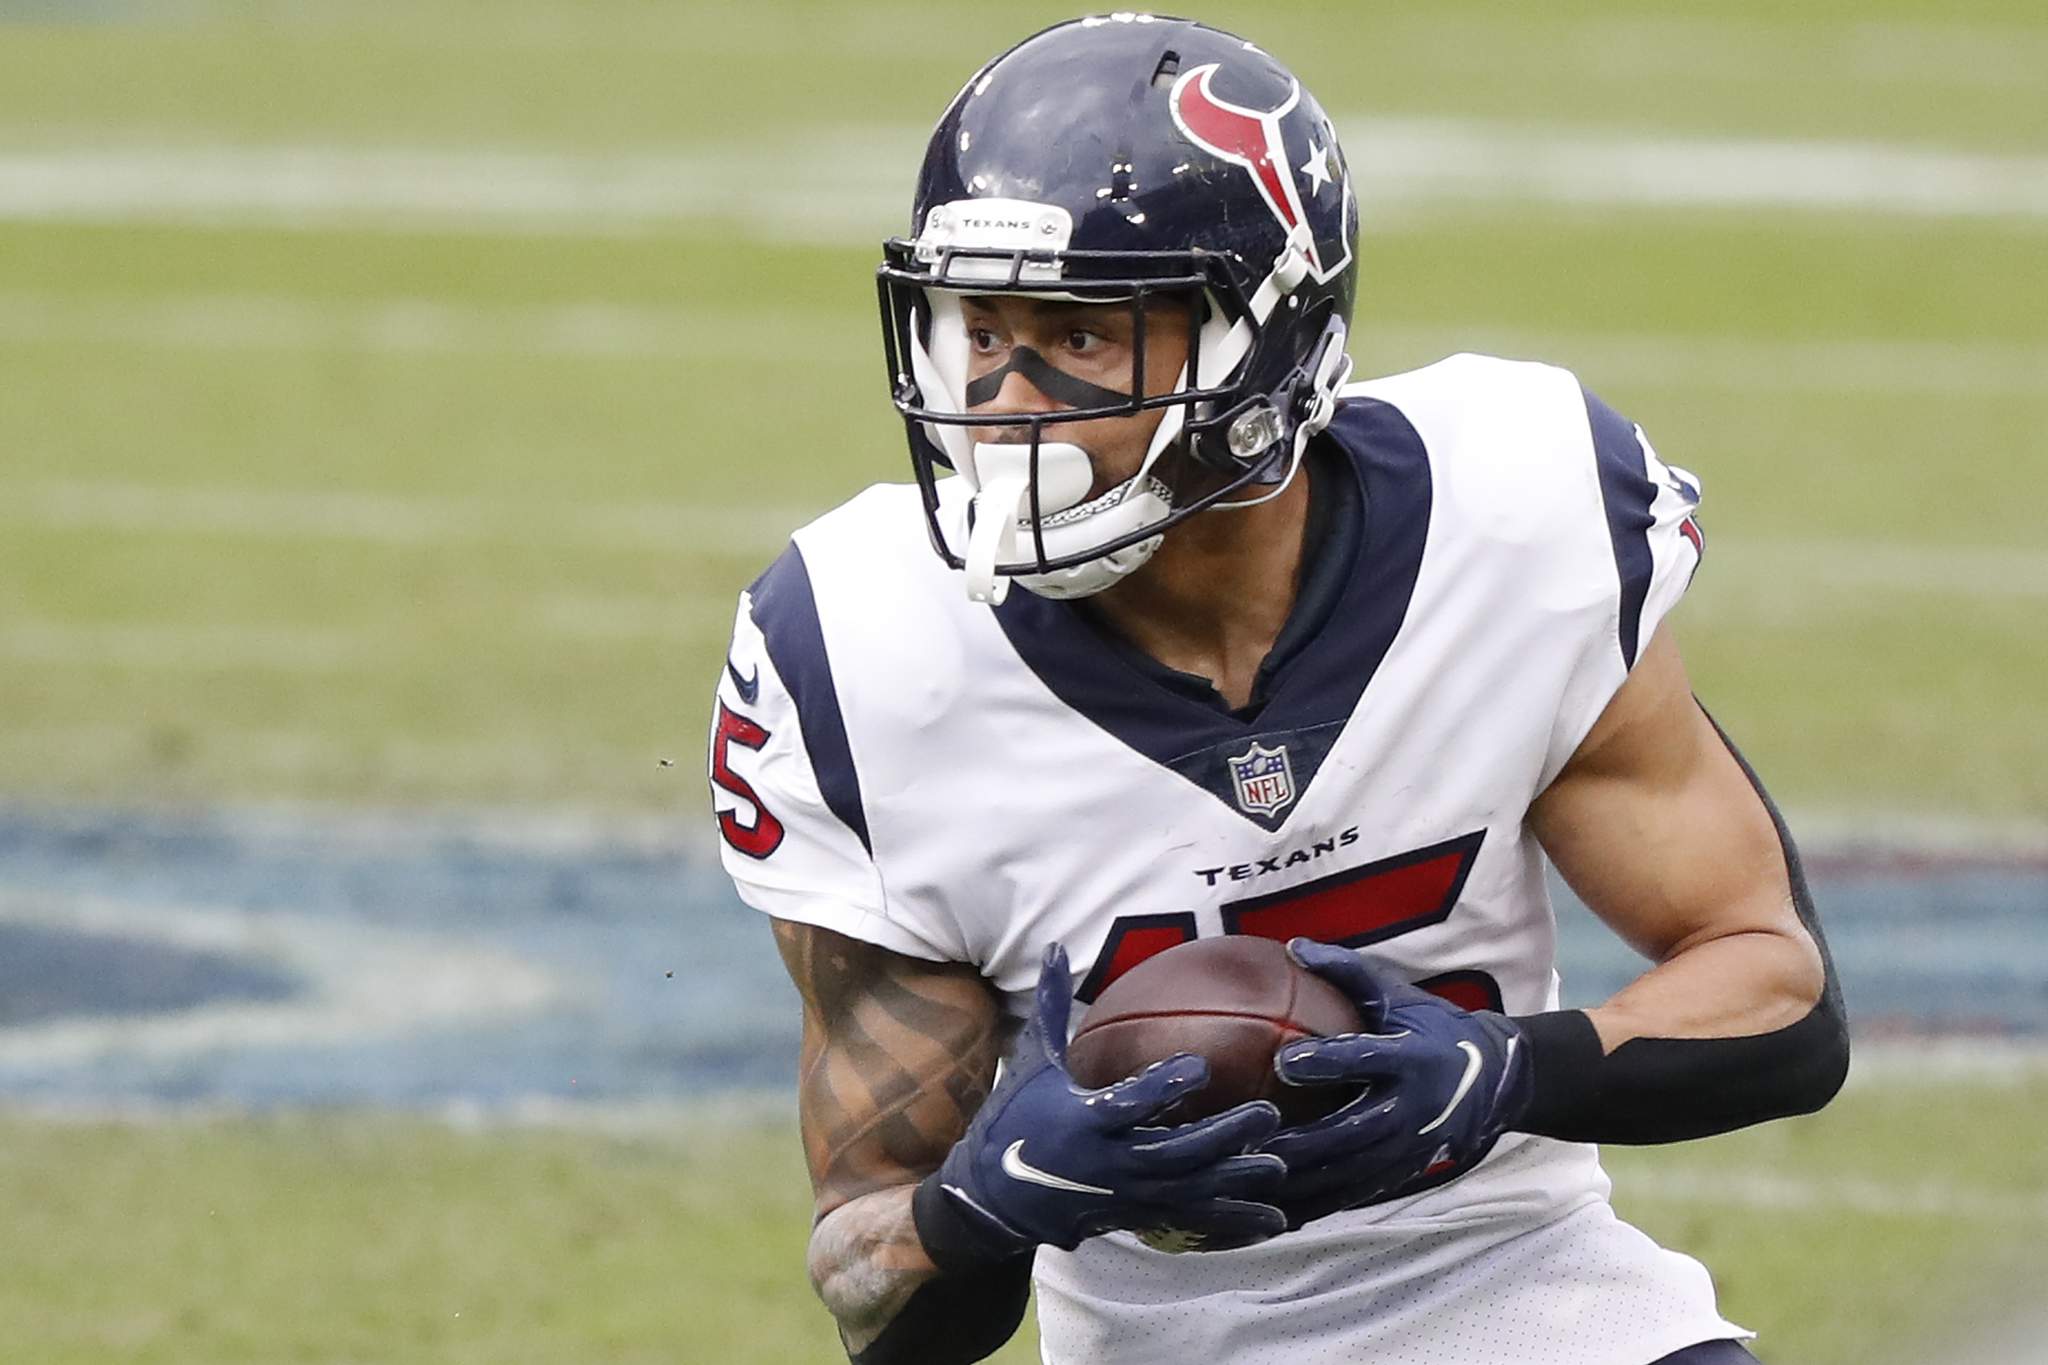 New Dolphins receiver Will Fuller ‘super excited’ to arrive in South Florida and work with quarterback Tua Tagovailoa